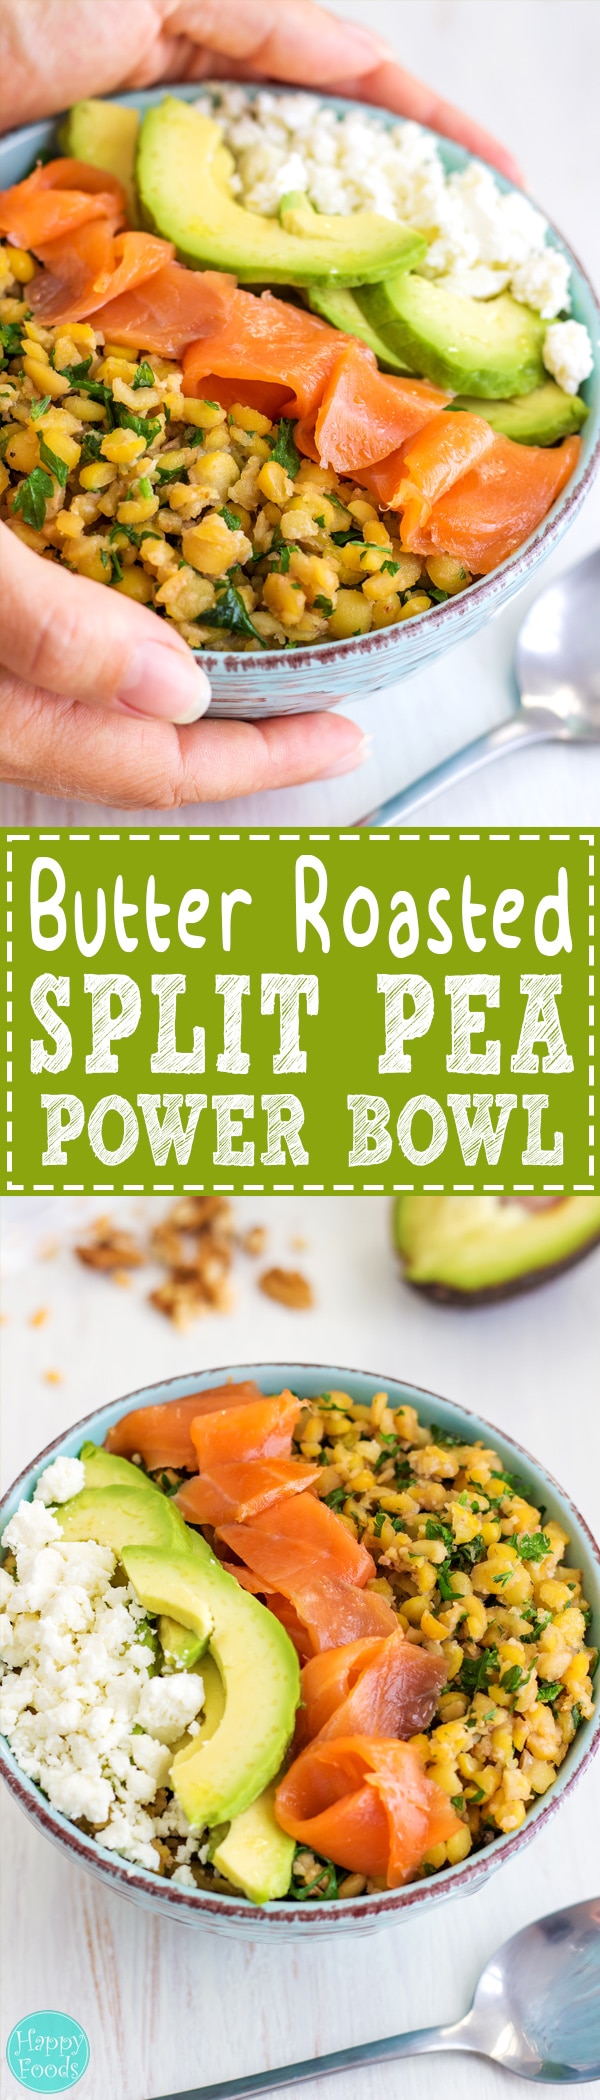 Butter Roasted Split Pea Power Bowl - Packed with protein, good fats and vitamins not only fills you up but gives you the much needed energy boost and provides essential nutrients. Easy recipe! You only need a split peas, avocado, feta cheese & smoked salmon | happyfoodstube.com